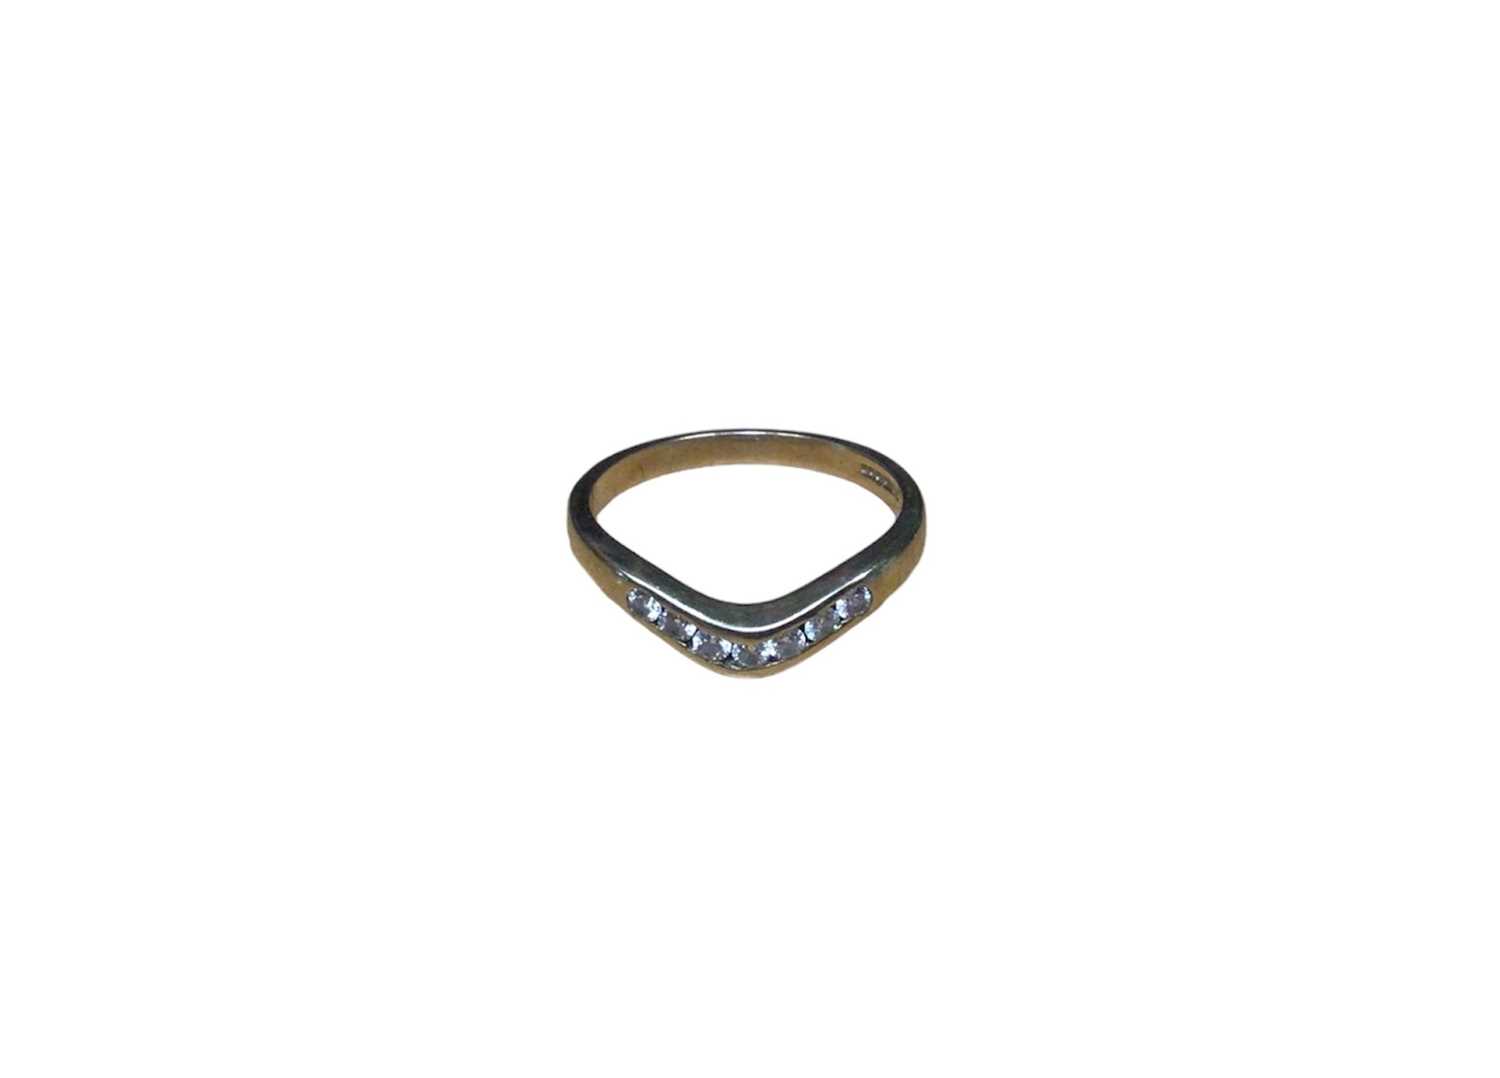 Lot 32 - 9ct gold diamond eternity ring with seven brilliant cut diamonds, weighing approximately 0.25cts in total